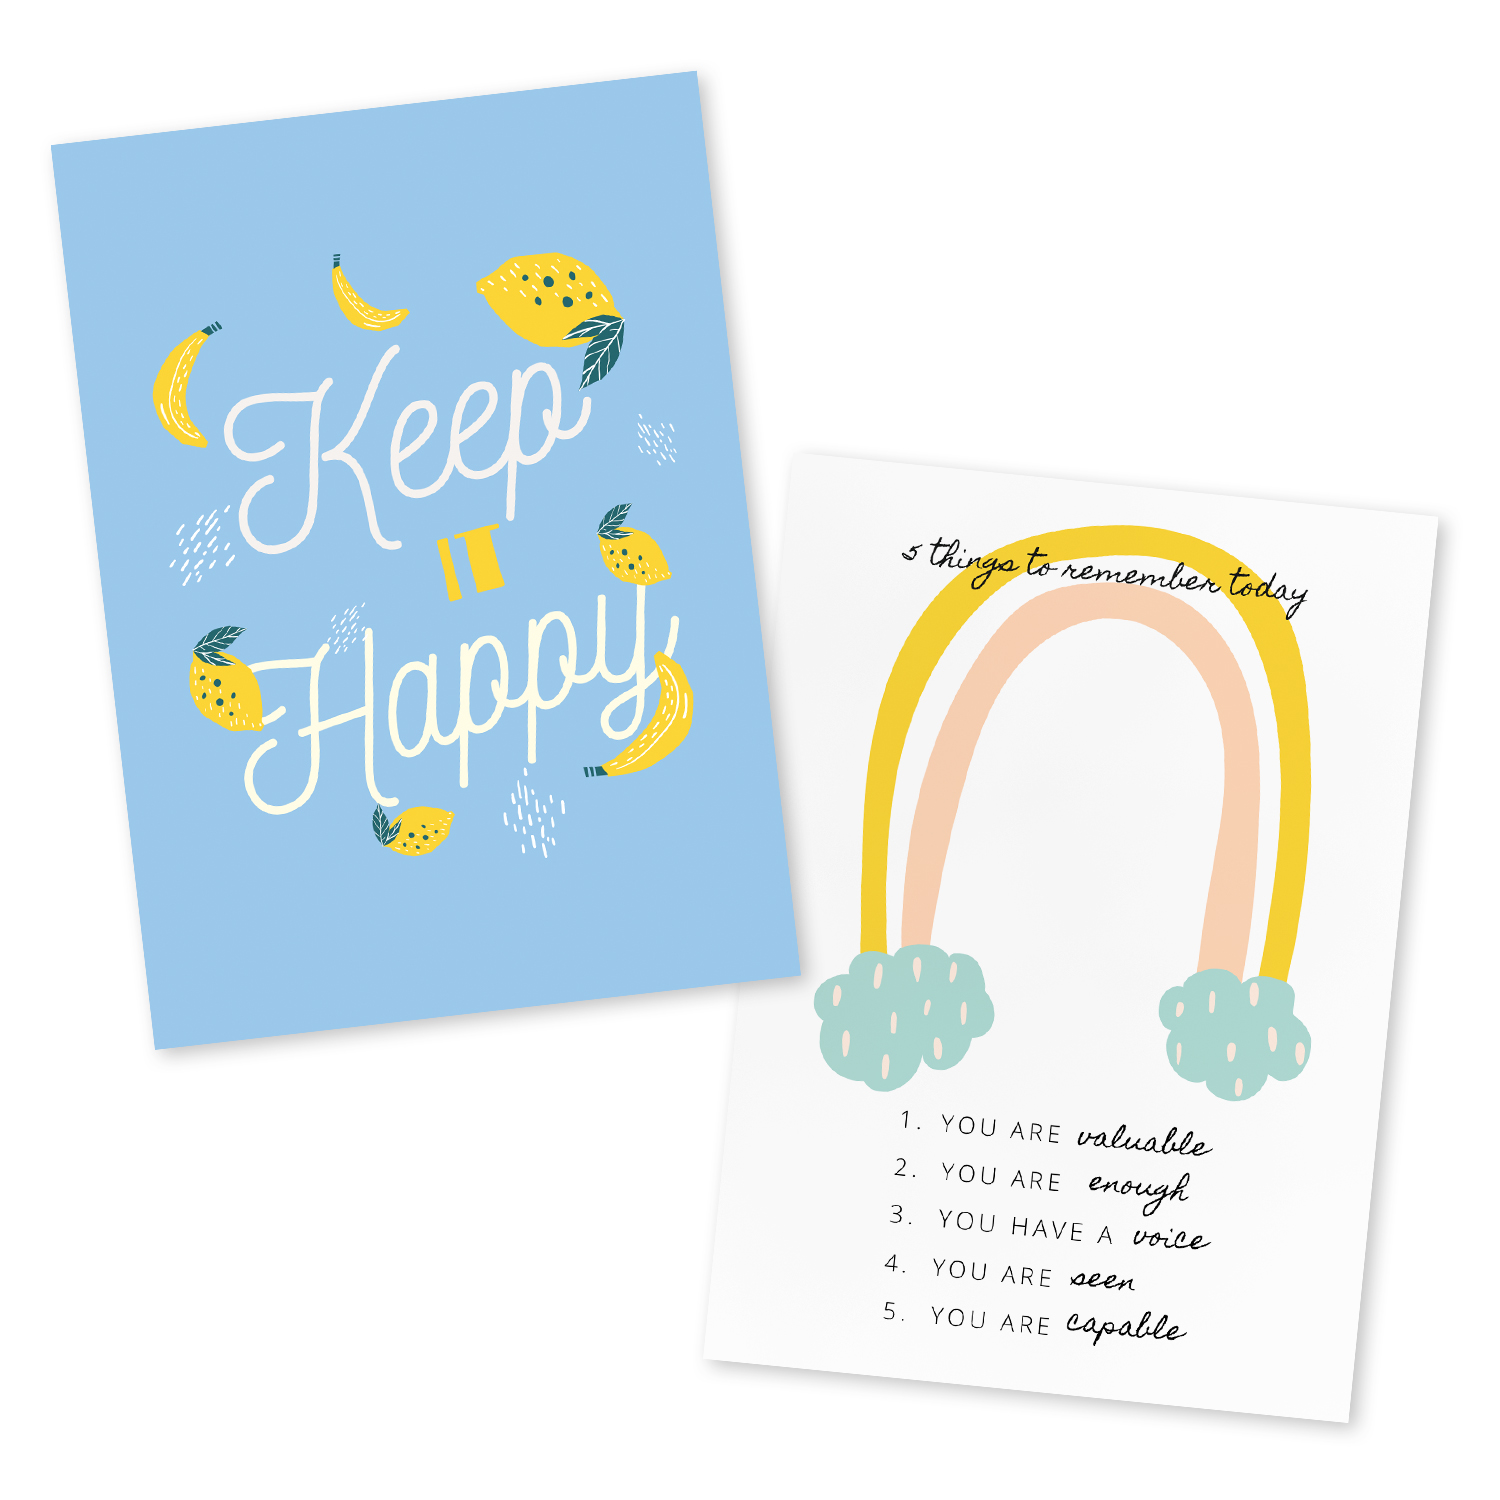 Wish By April, Influencer, crafting, PrintWorks, printables, templates, Crafter, Homeschooler, Party Planner